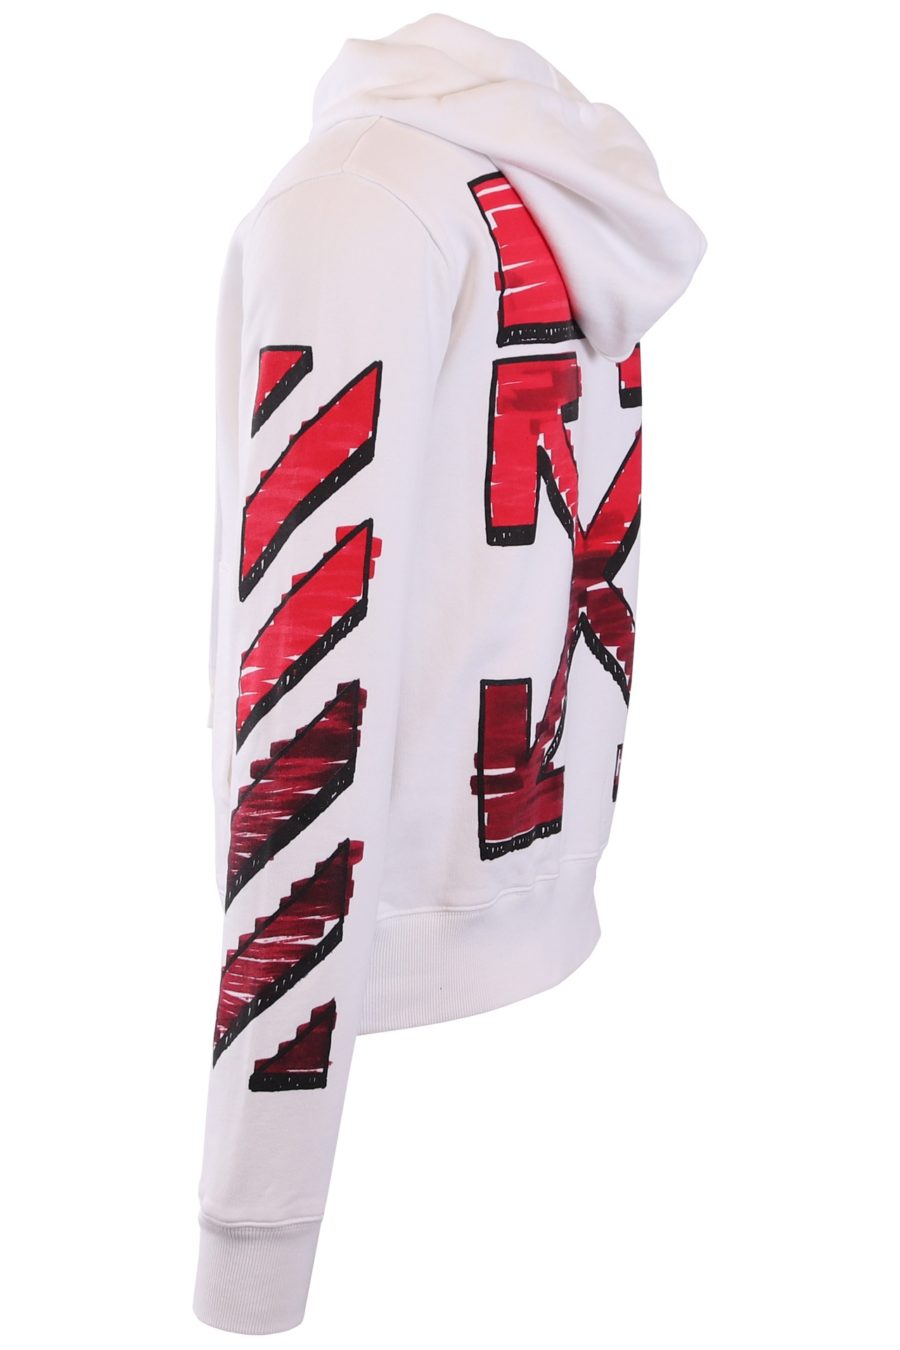 Off-White white hoodie with red arrows - f2c9379451515e83c8c4fa314a3f7364bcadb32782